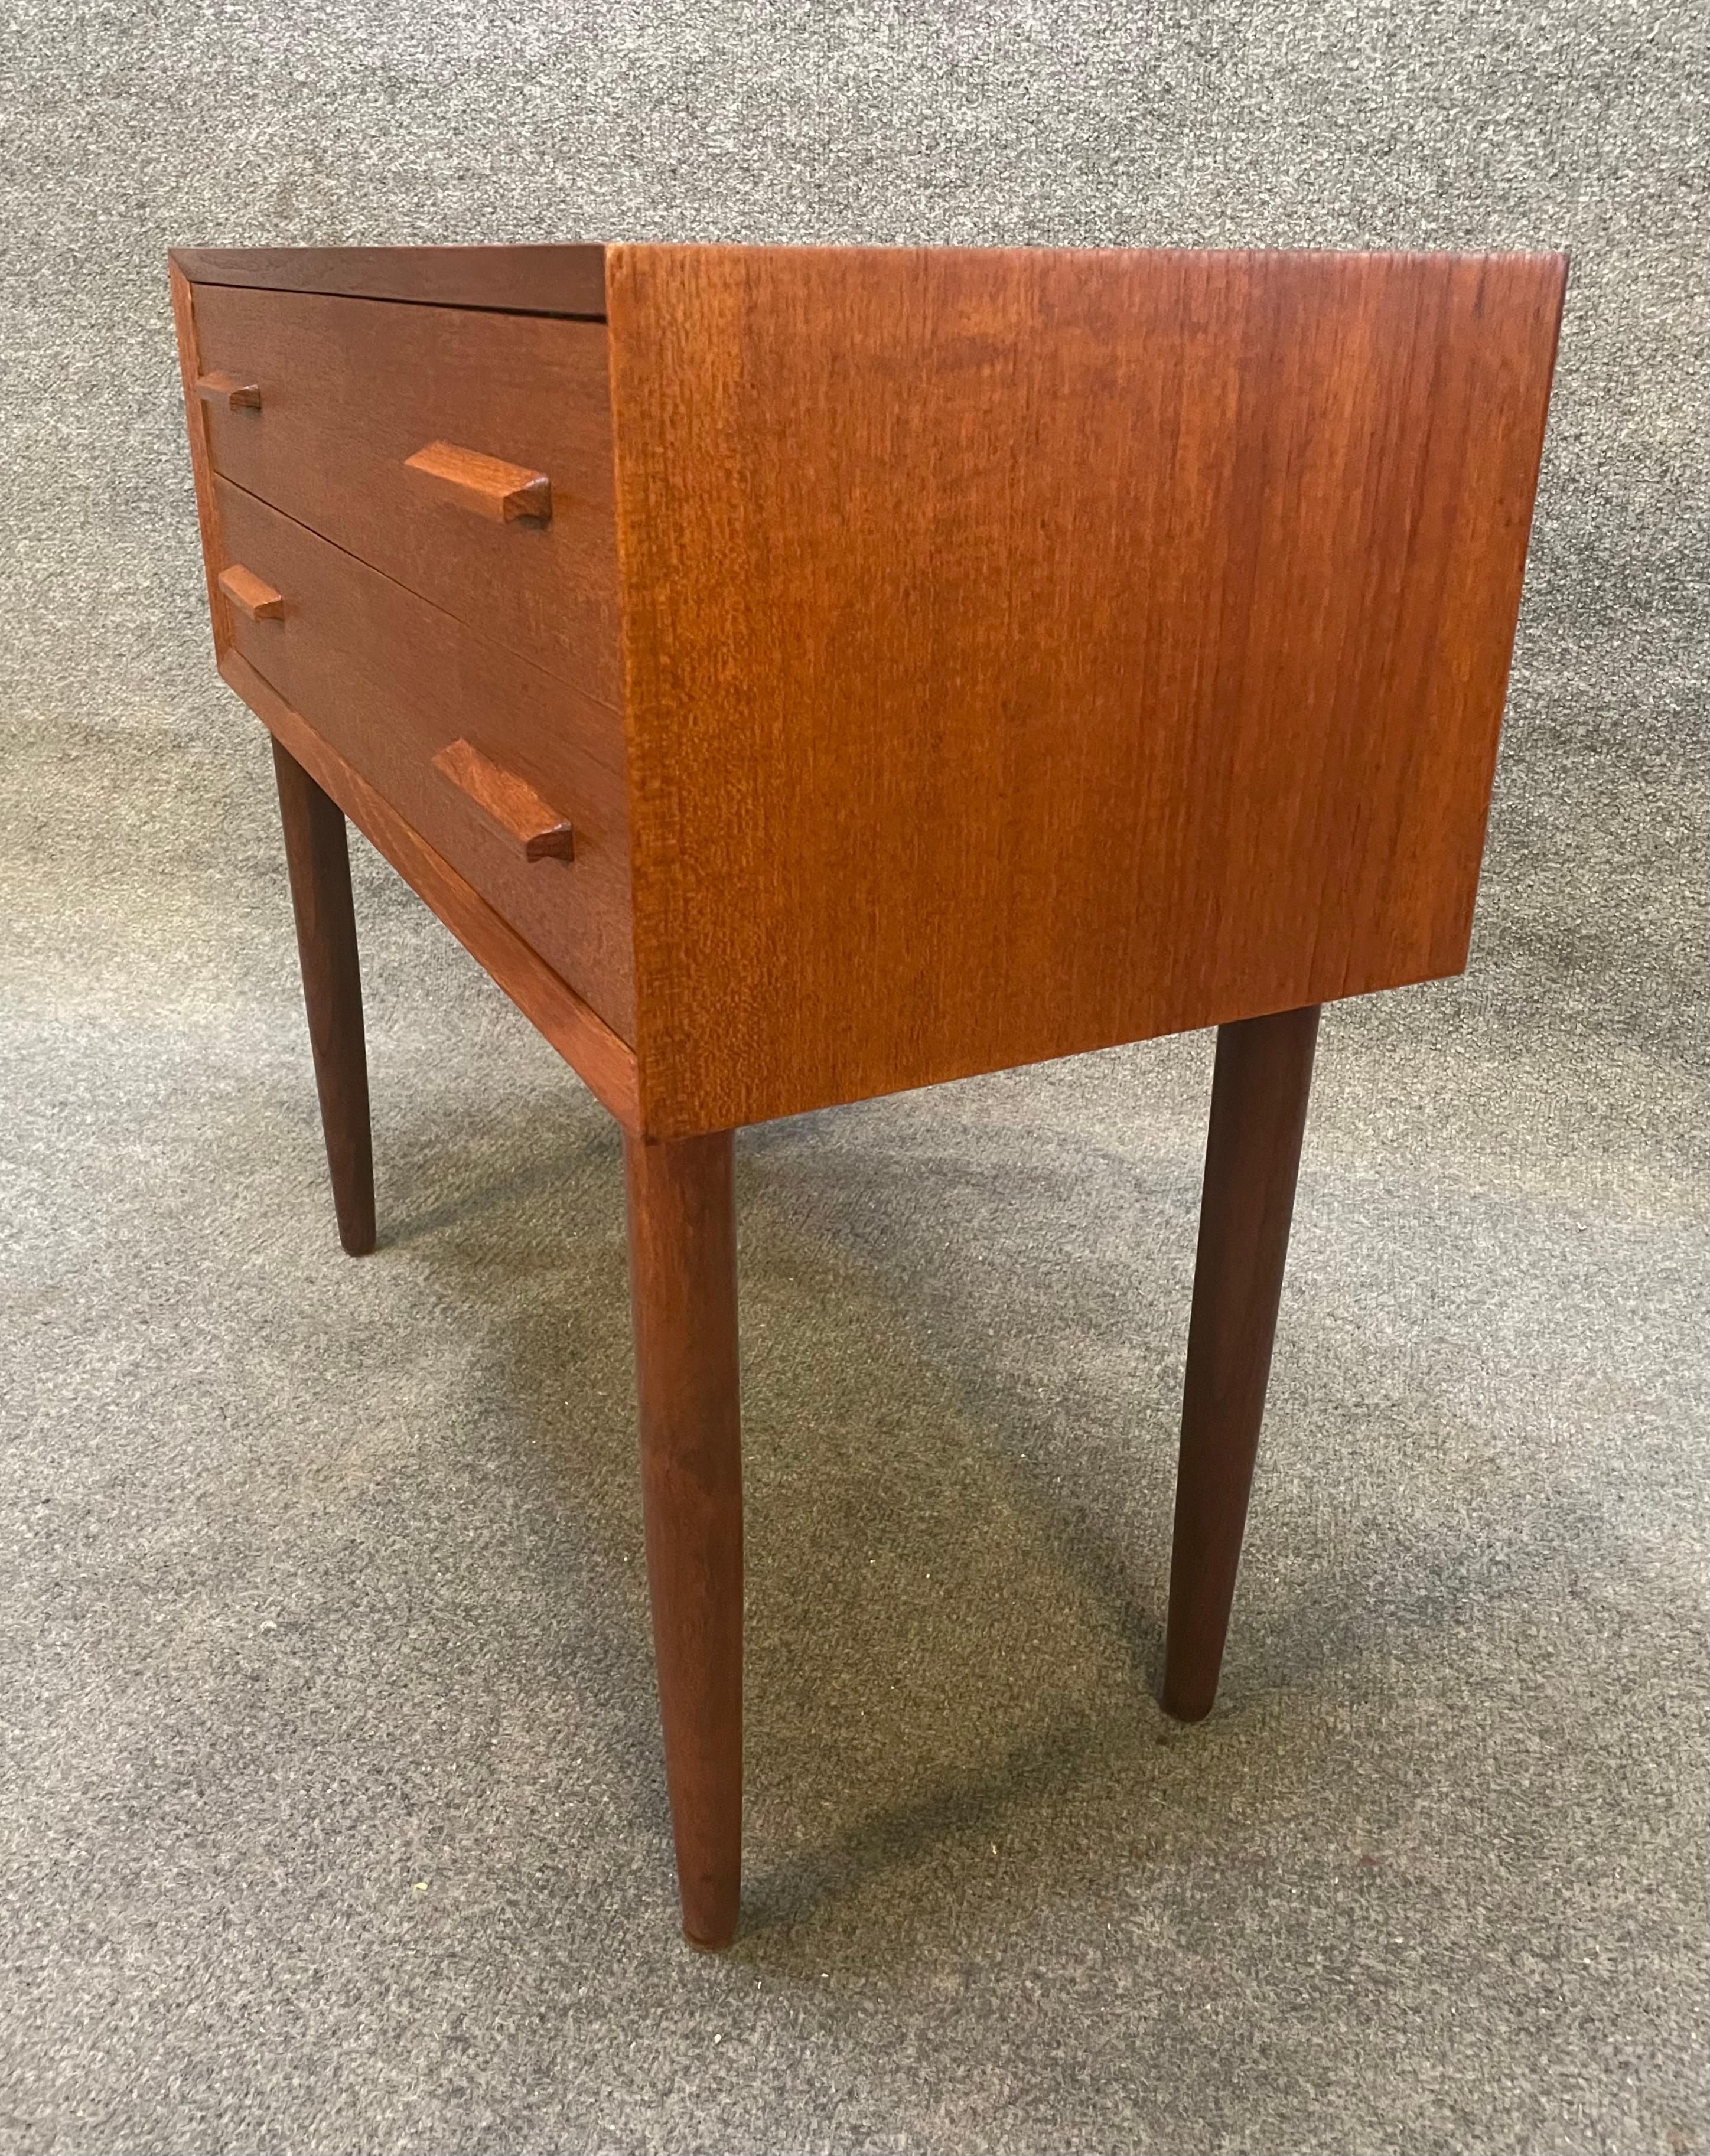 Here is a beautiful scandinavian modern entry chest - side table in teak wood manufactured in Denmark in the 1960's.
This exquisite case piece, recently imported from Europe to California before its refinishing, features a vibrant wood grain, two